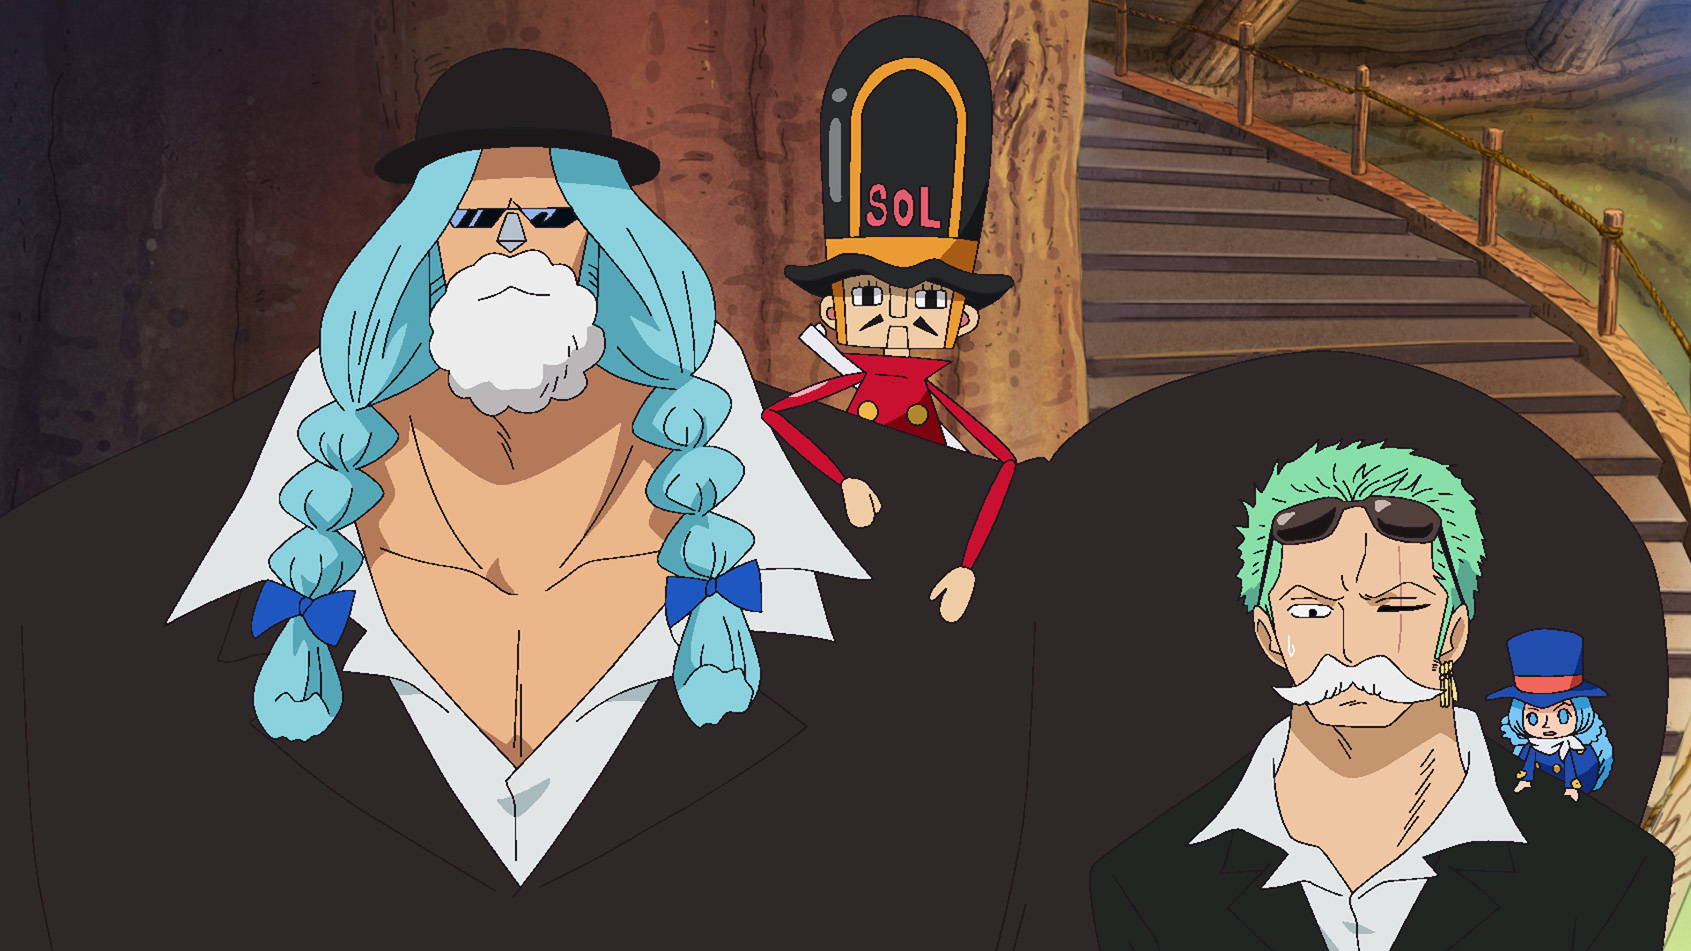 One Piece Season 11 Episode 634 A Pirate Noble Cavendish Uncut English Video Player Is Loading Play Video Loaded 0 Marathon Lights Language English Language Japanese English Subtitles Subtitles Version Uncut Version Uncut Quality Quality